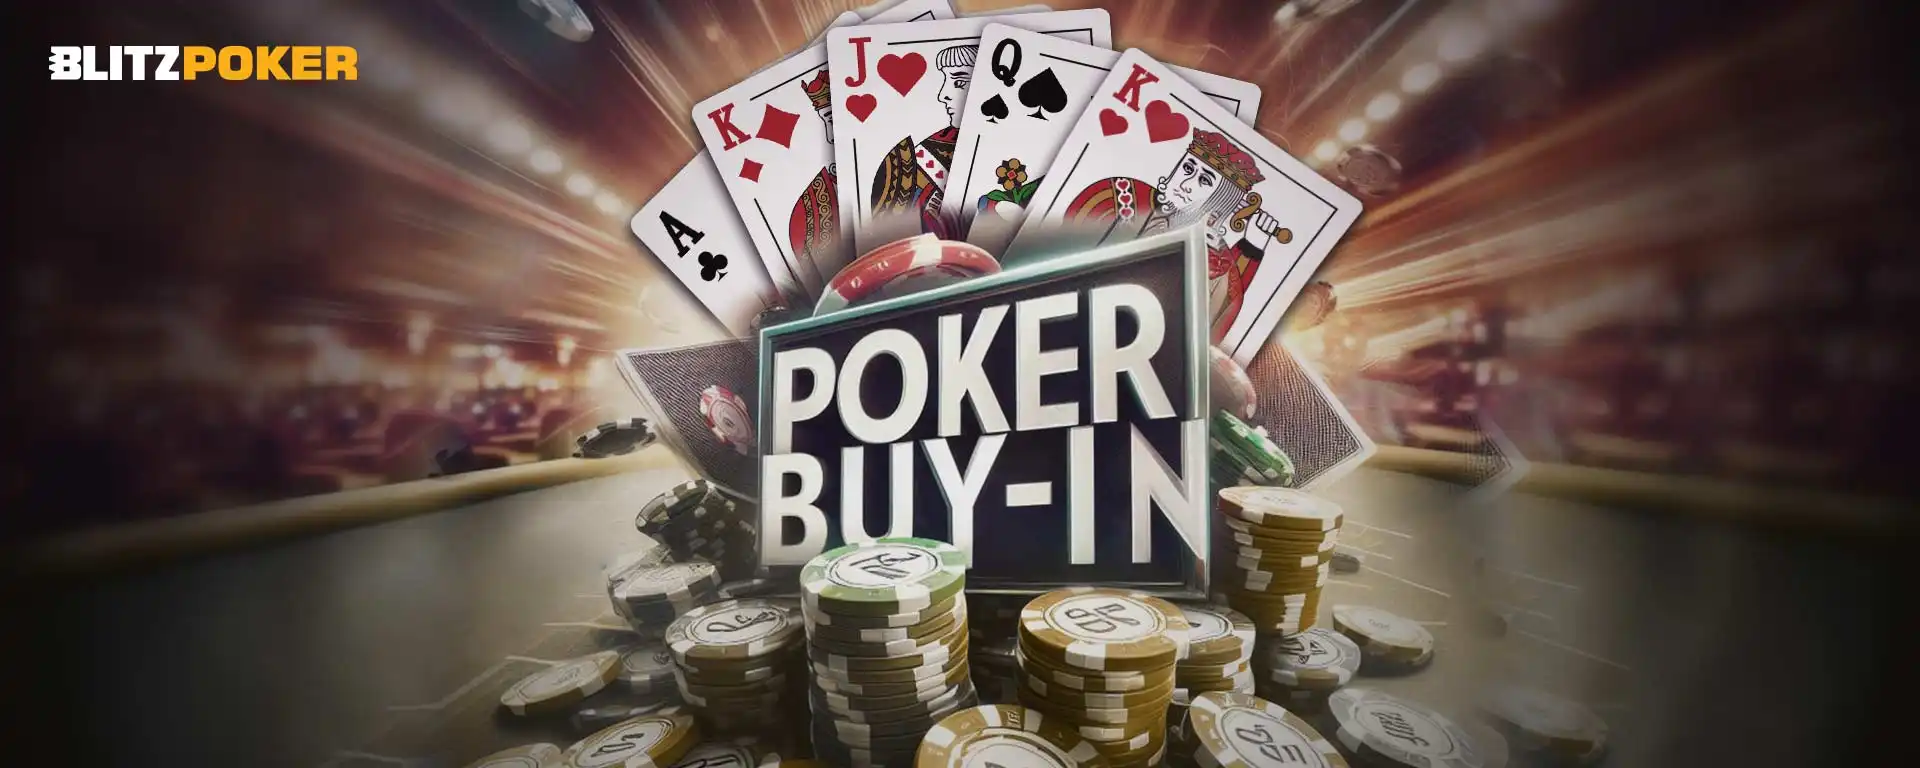 Buy-in For Poker: Meaning, Deciding Factors & More